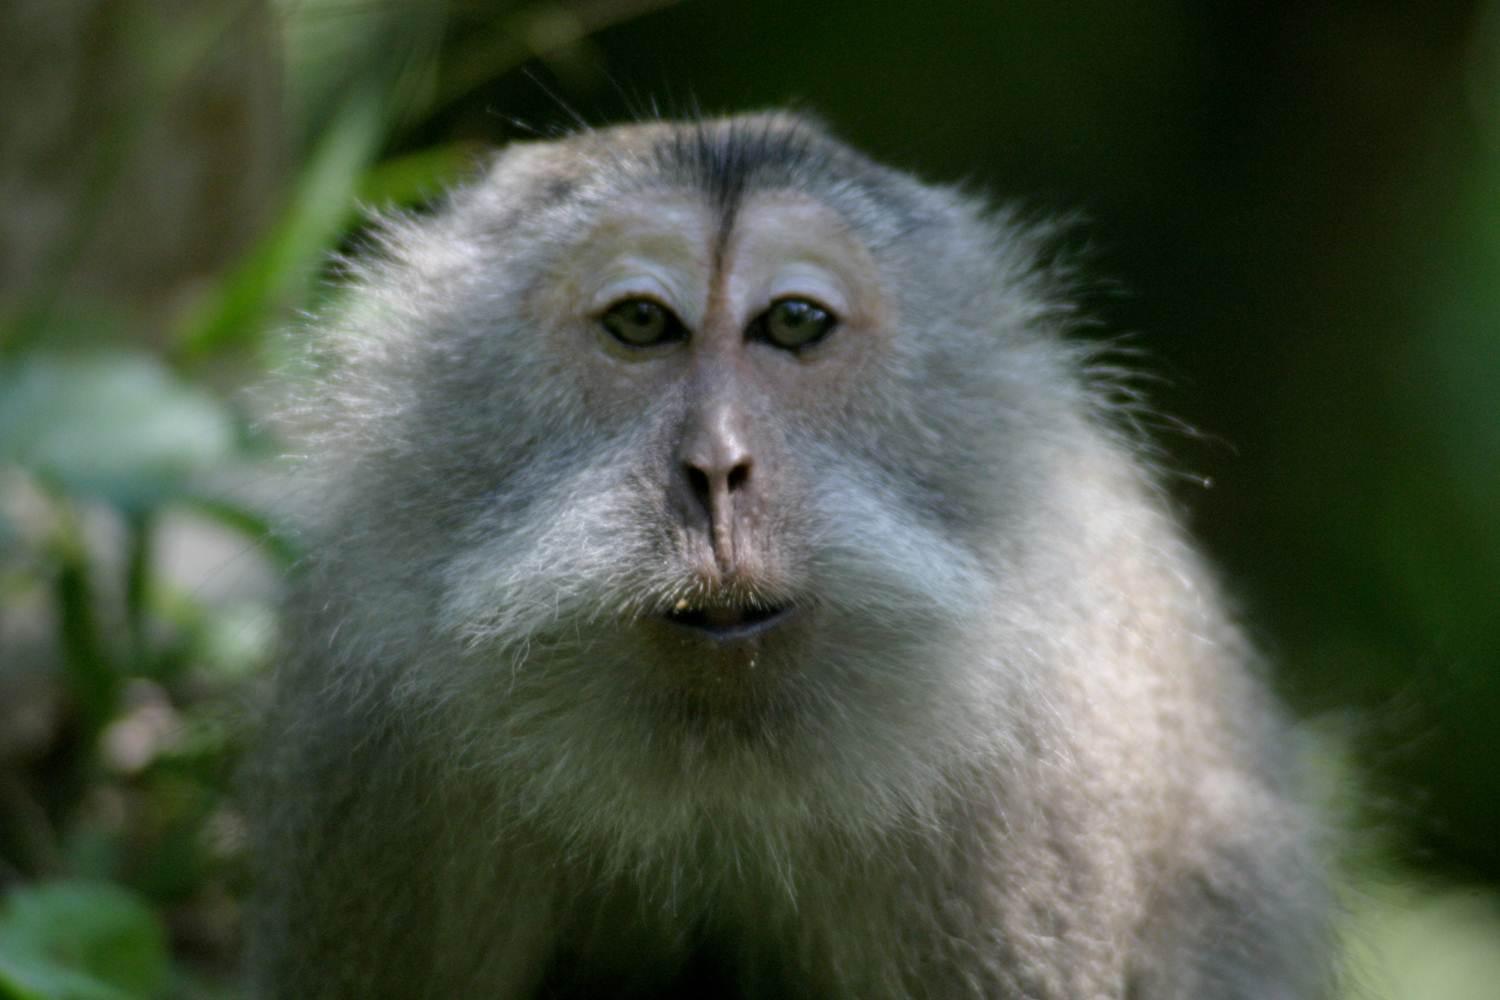 A cynomolgus macaque showing an affiliative face, with ears and brow drawn back, eyes looking at the interactant and mouth puckered.